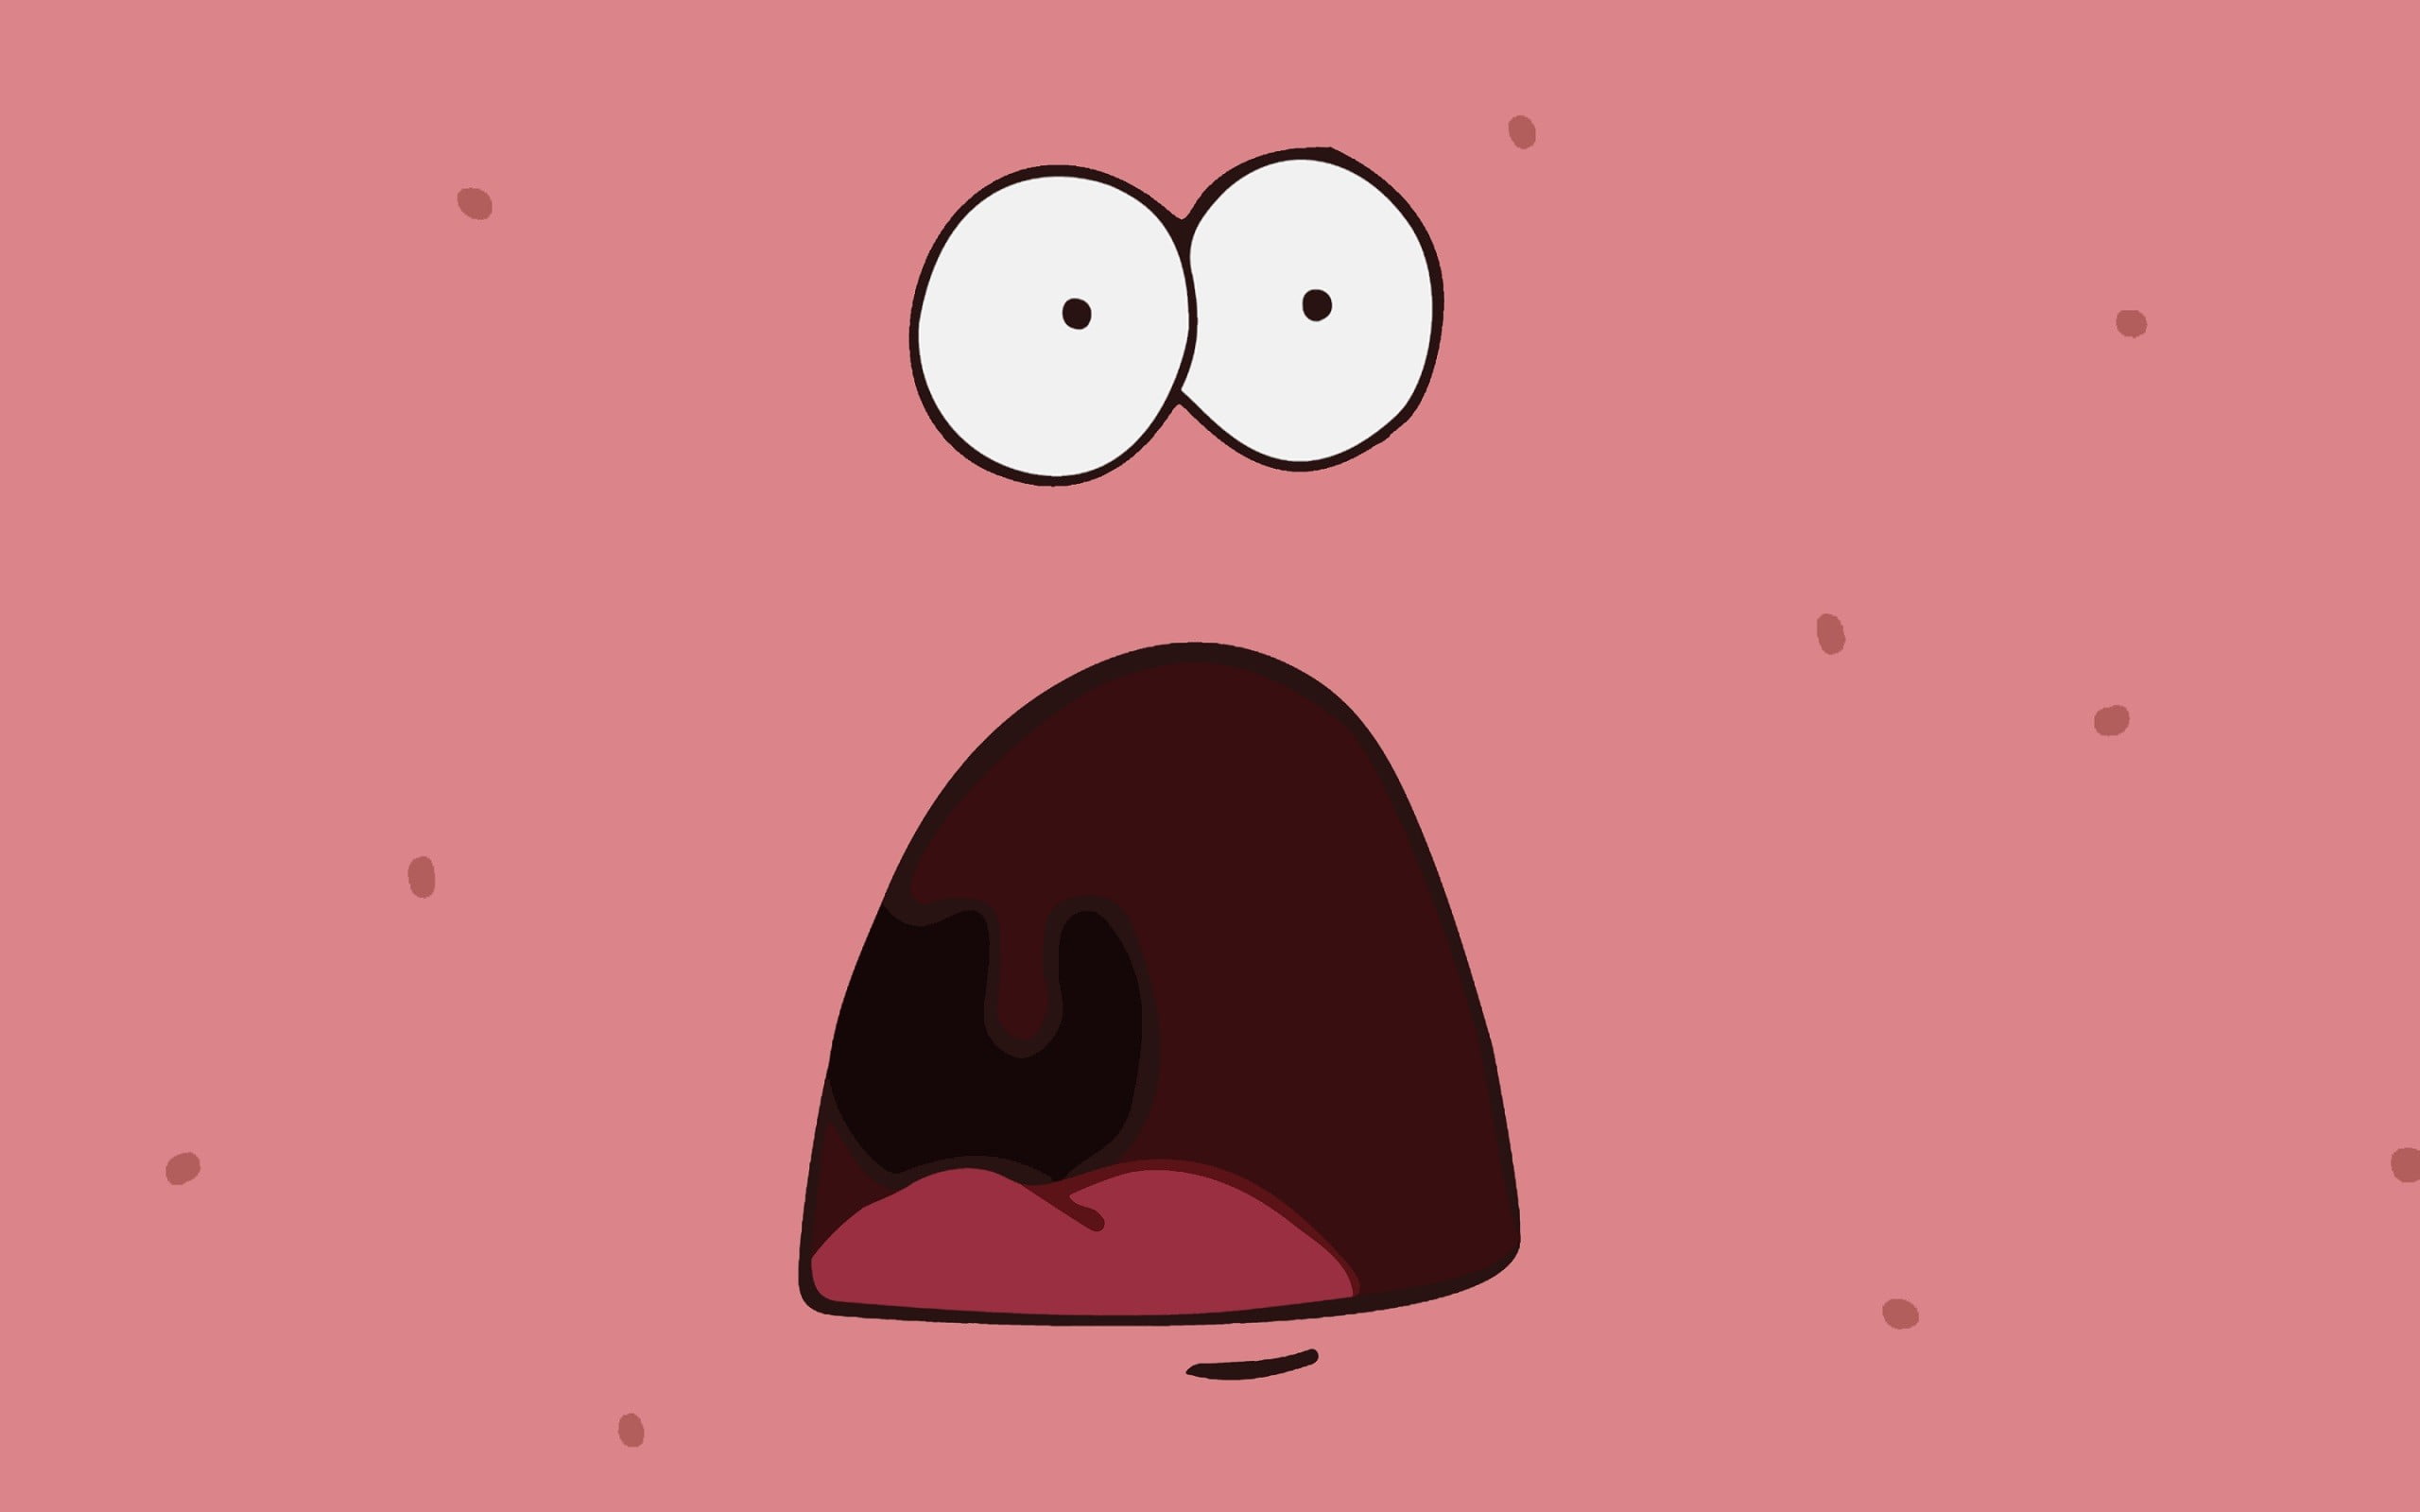 A cartoon character with big eyes and mouth - SpongeBob